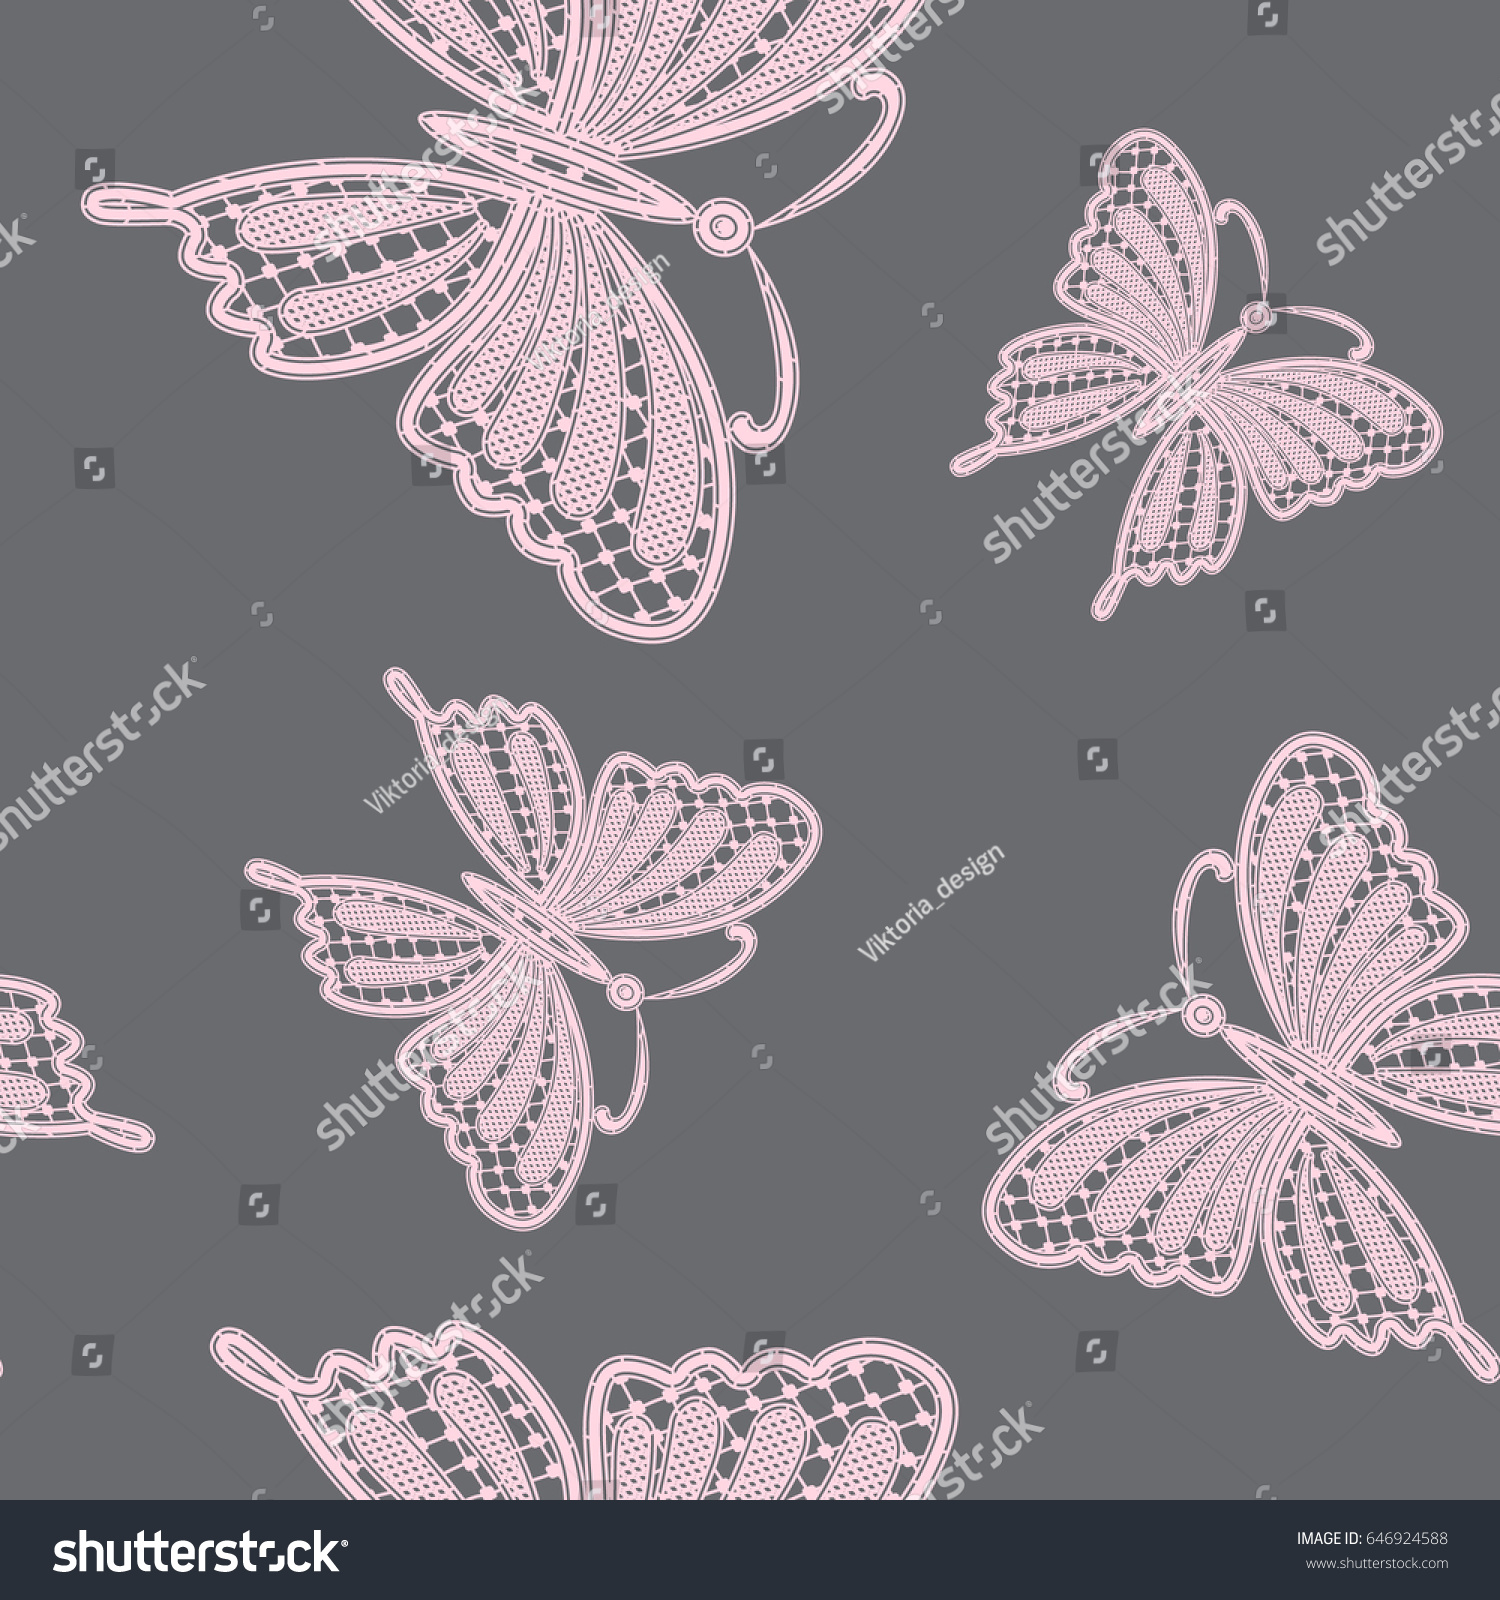 Download Vector Seamless Pattern Lace Butterfly Stock Vector ...